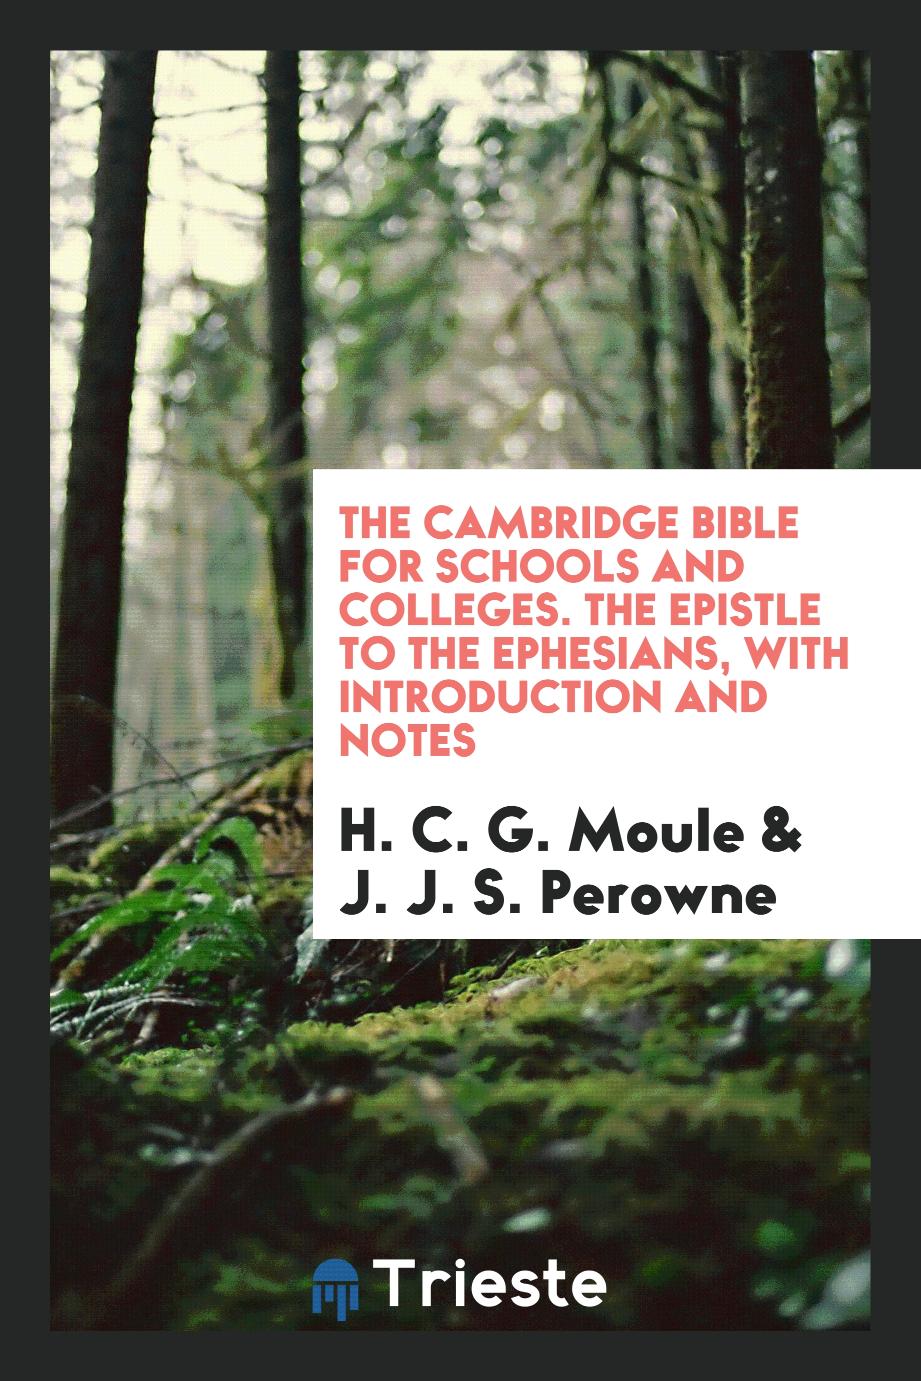 The Cambridge Bible for Schools and Colleges. The Epistle to the Ephesians, with Introduction and Notes